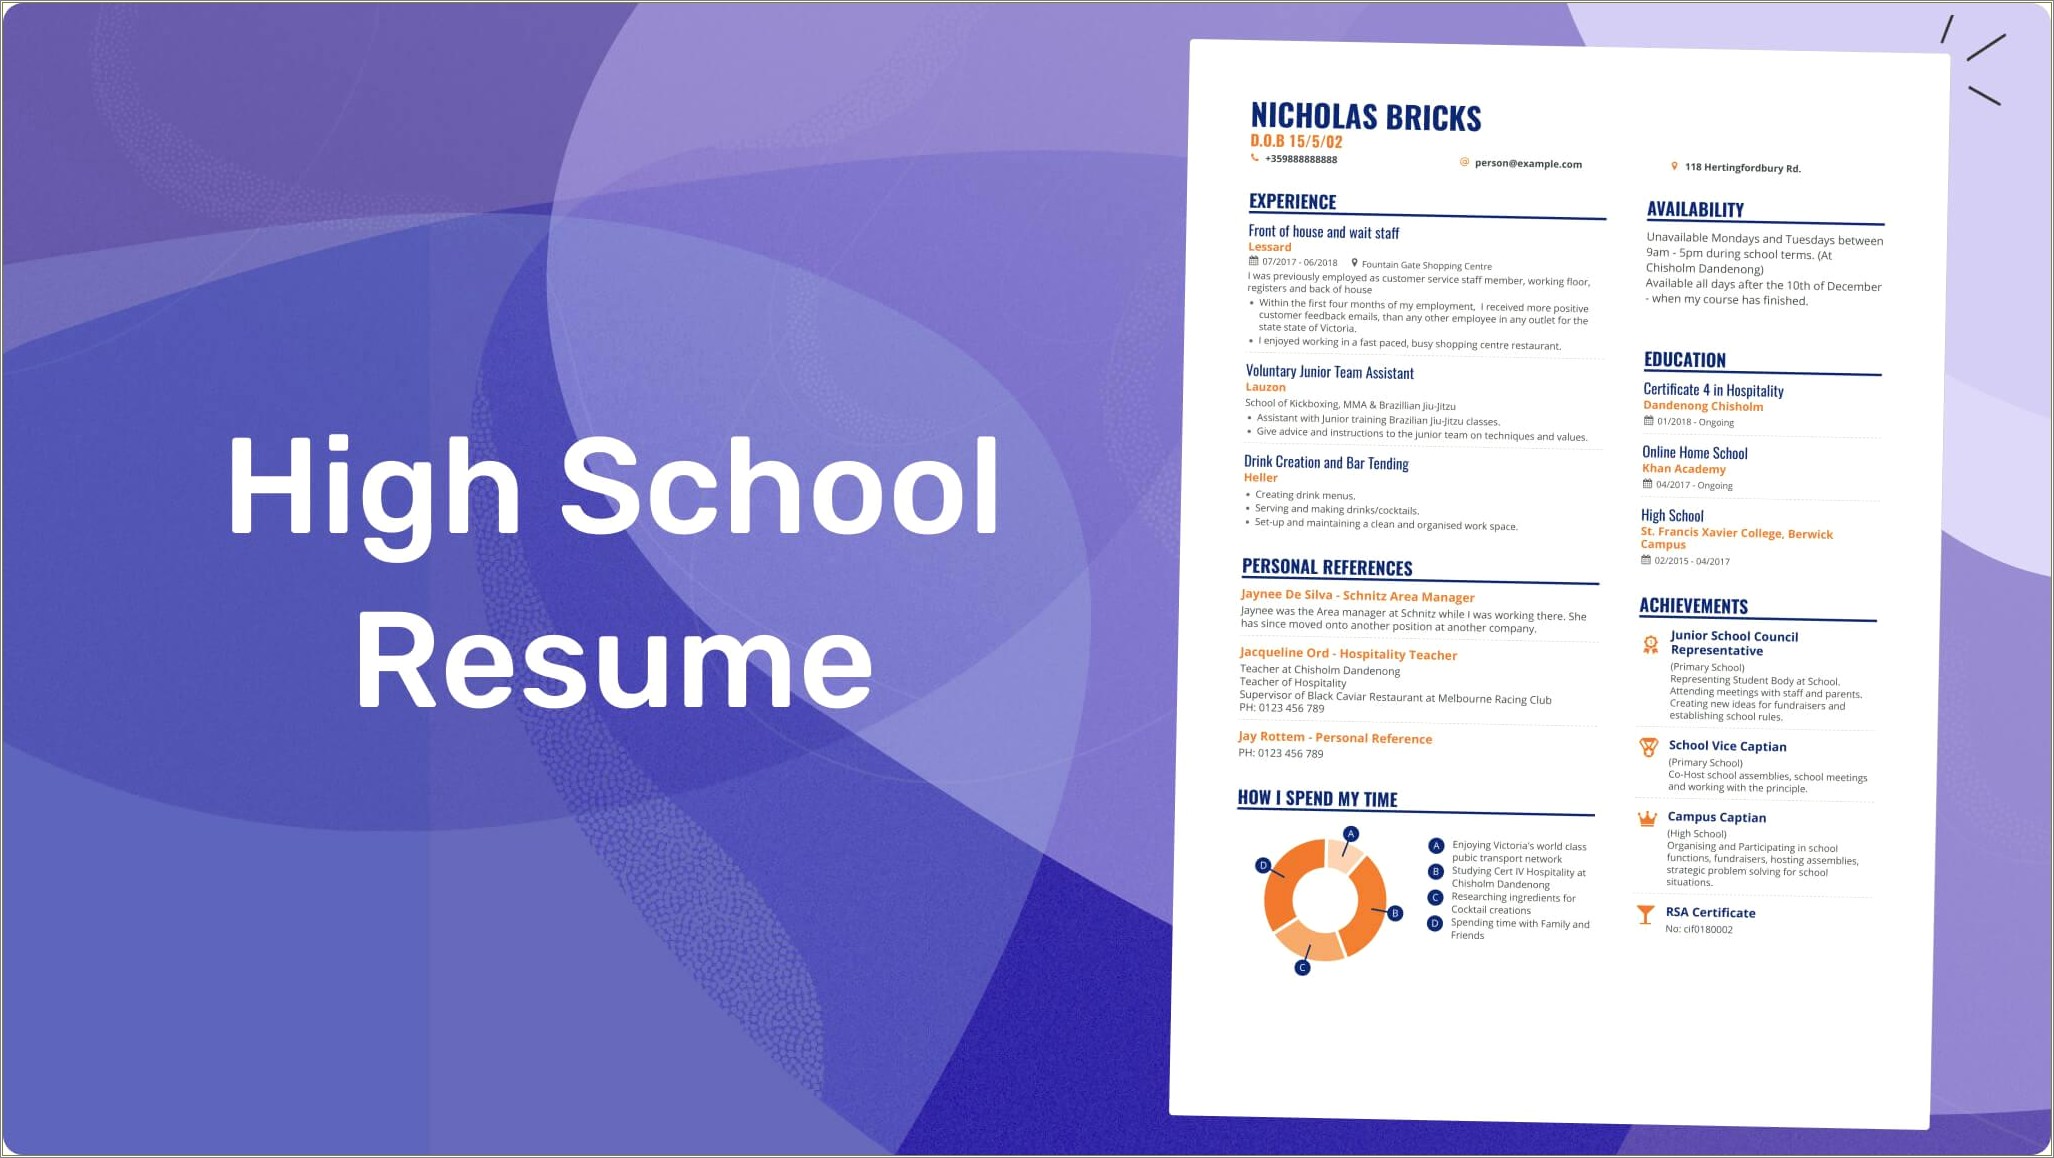 Should High School Be Included In Resume